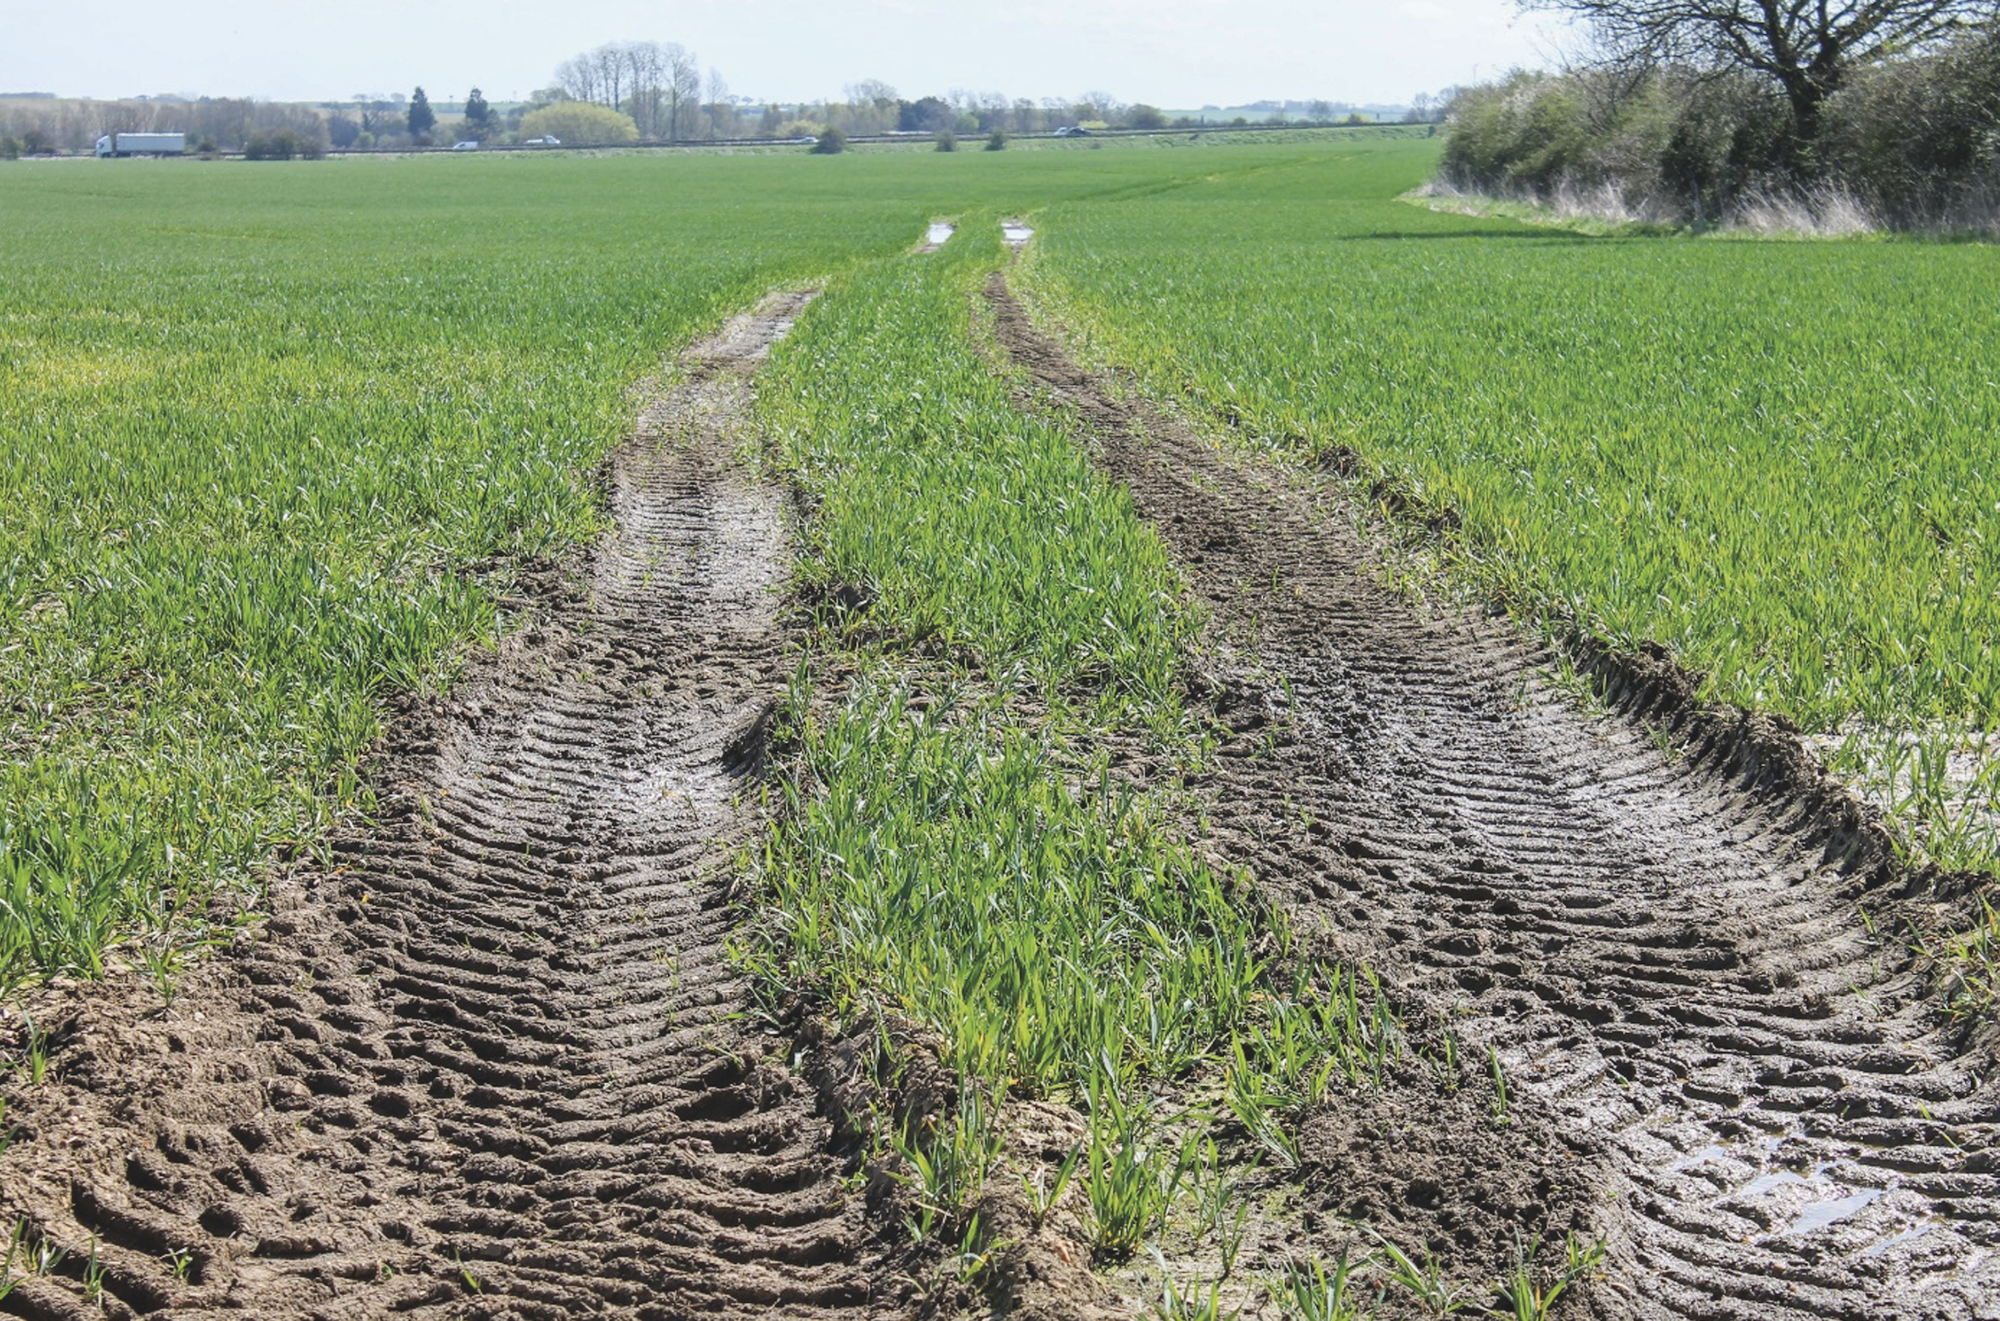 Wet soil – harvest damage avoidance and rectification